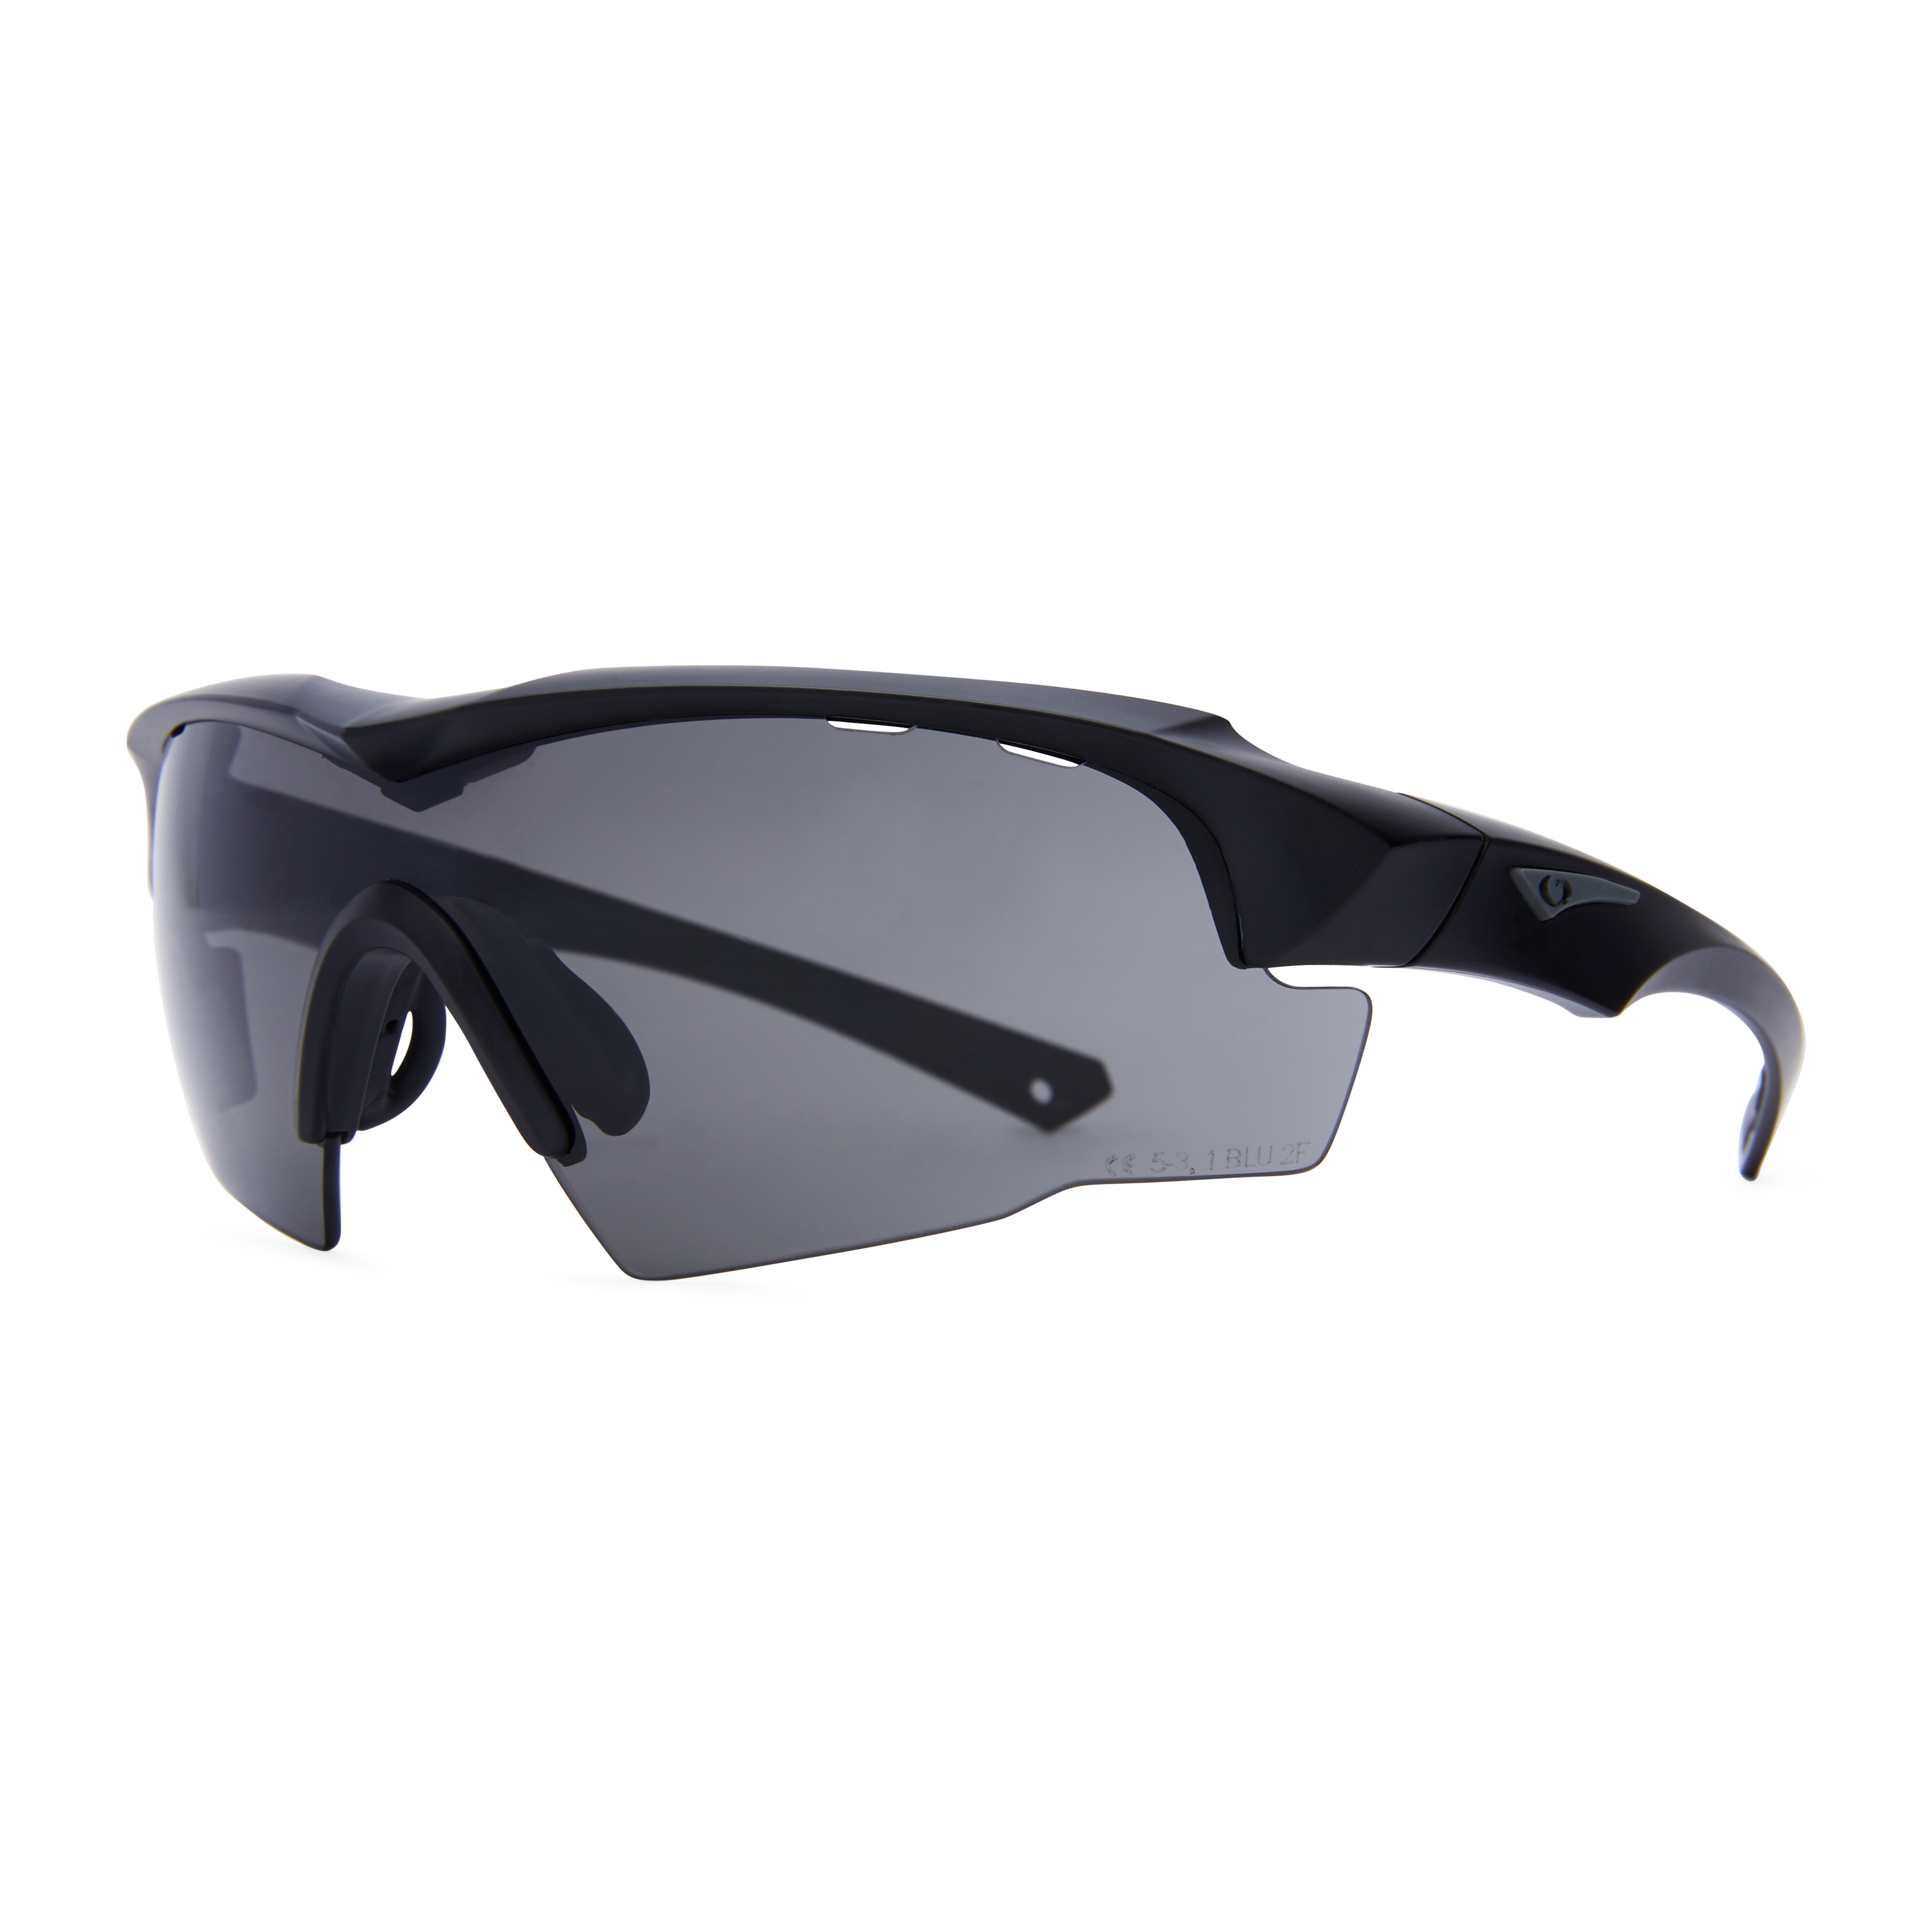 Jager Tactical Sunglasses